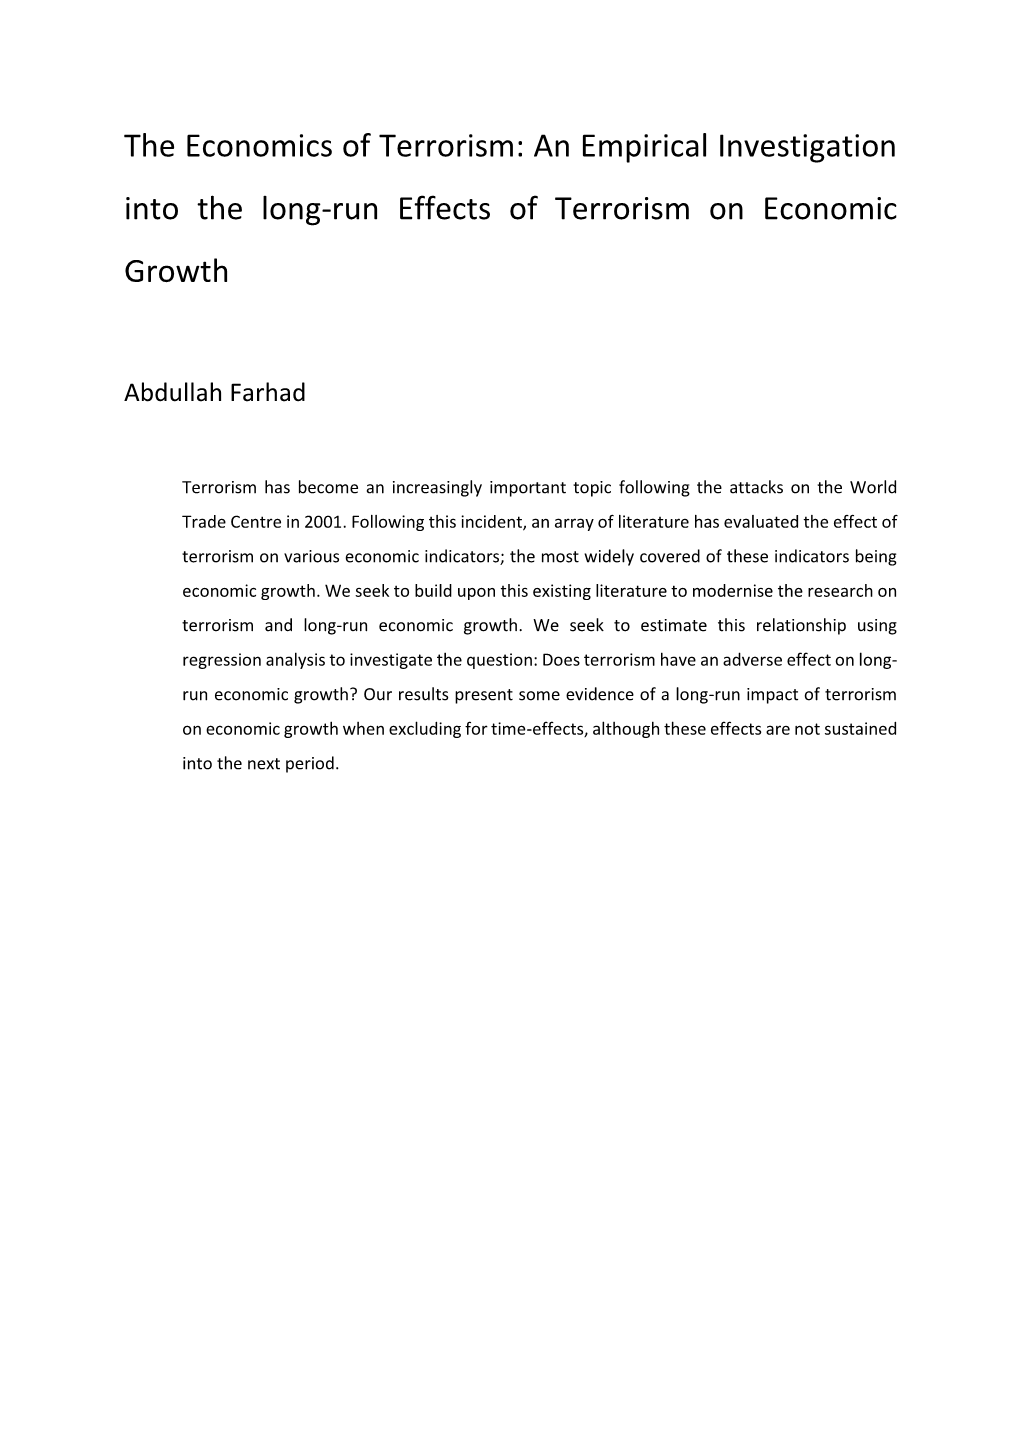 The Economics of Terrorism: an Empirical Investigation Into the Long-Run Effects of Terrorism on Economic Growth